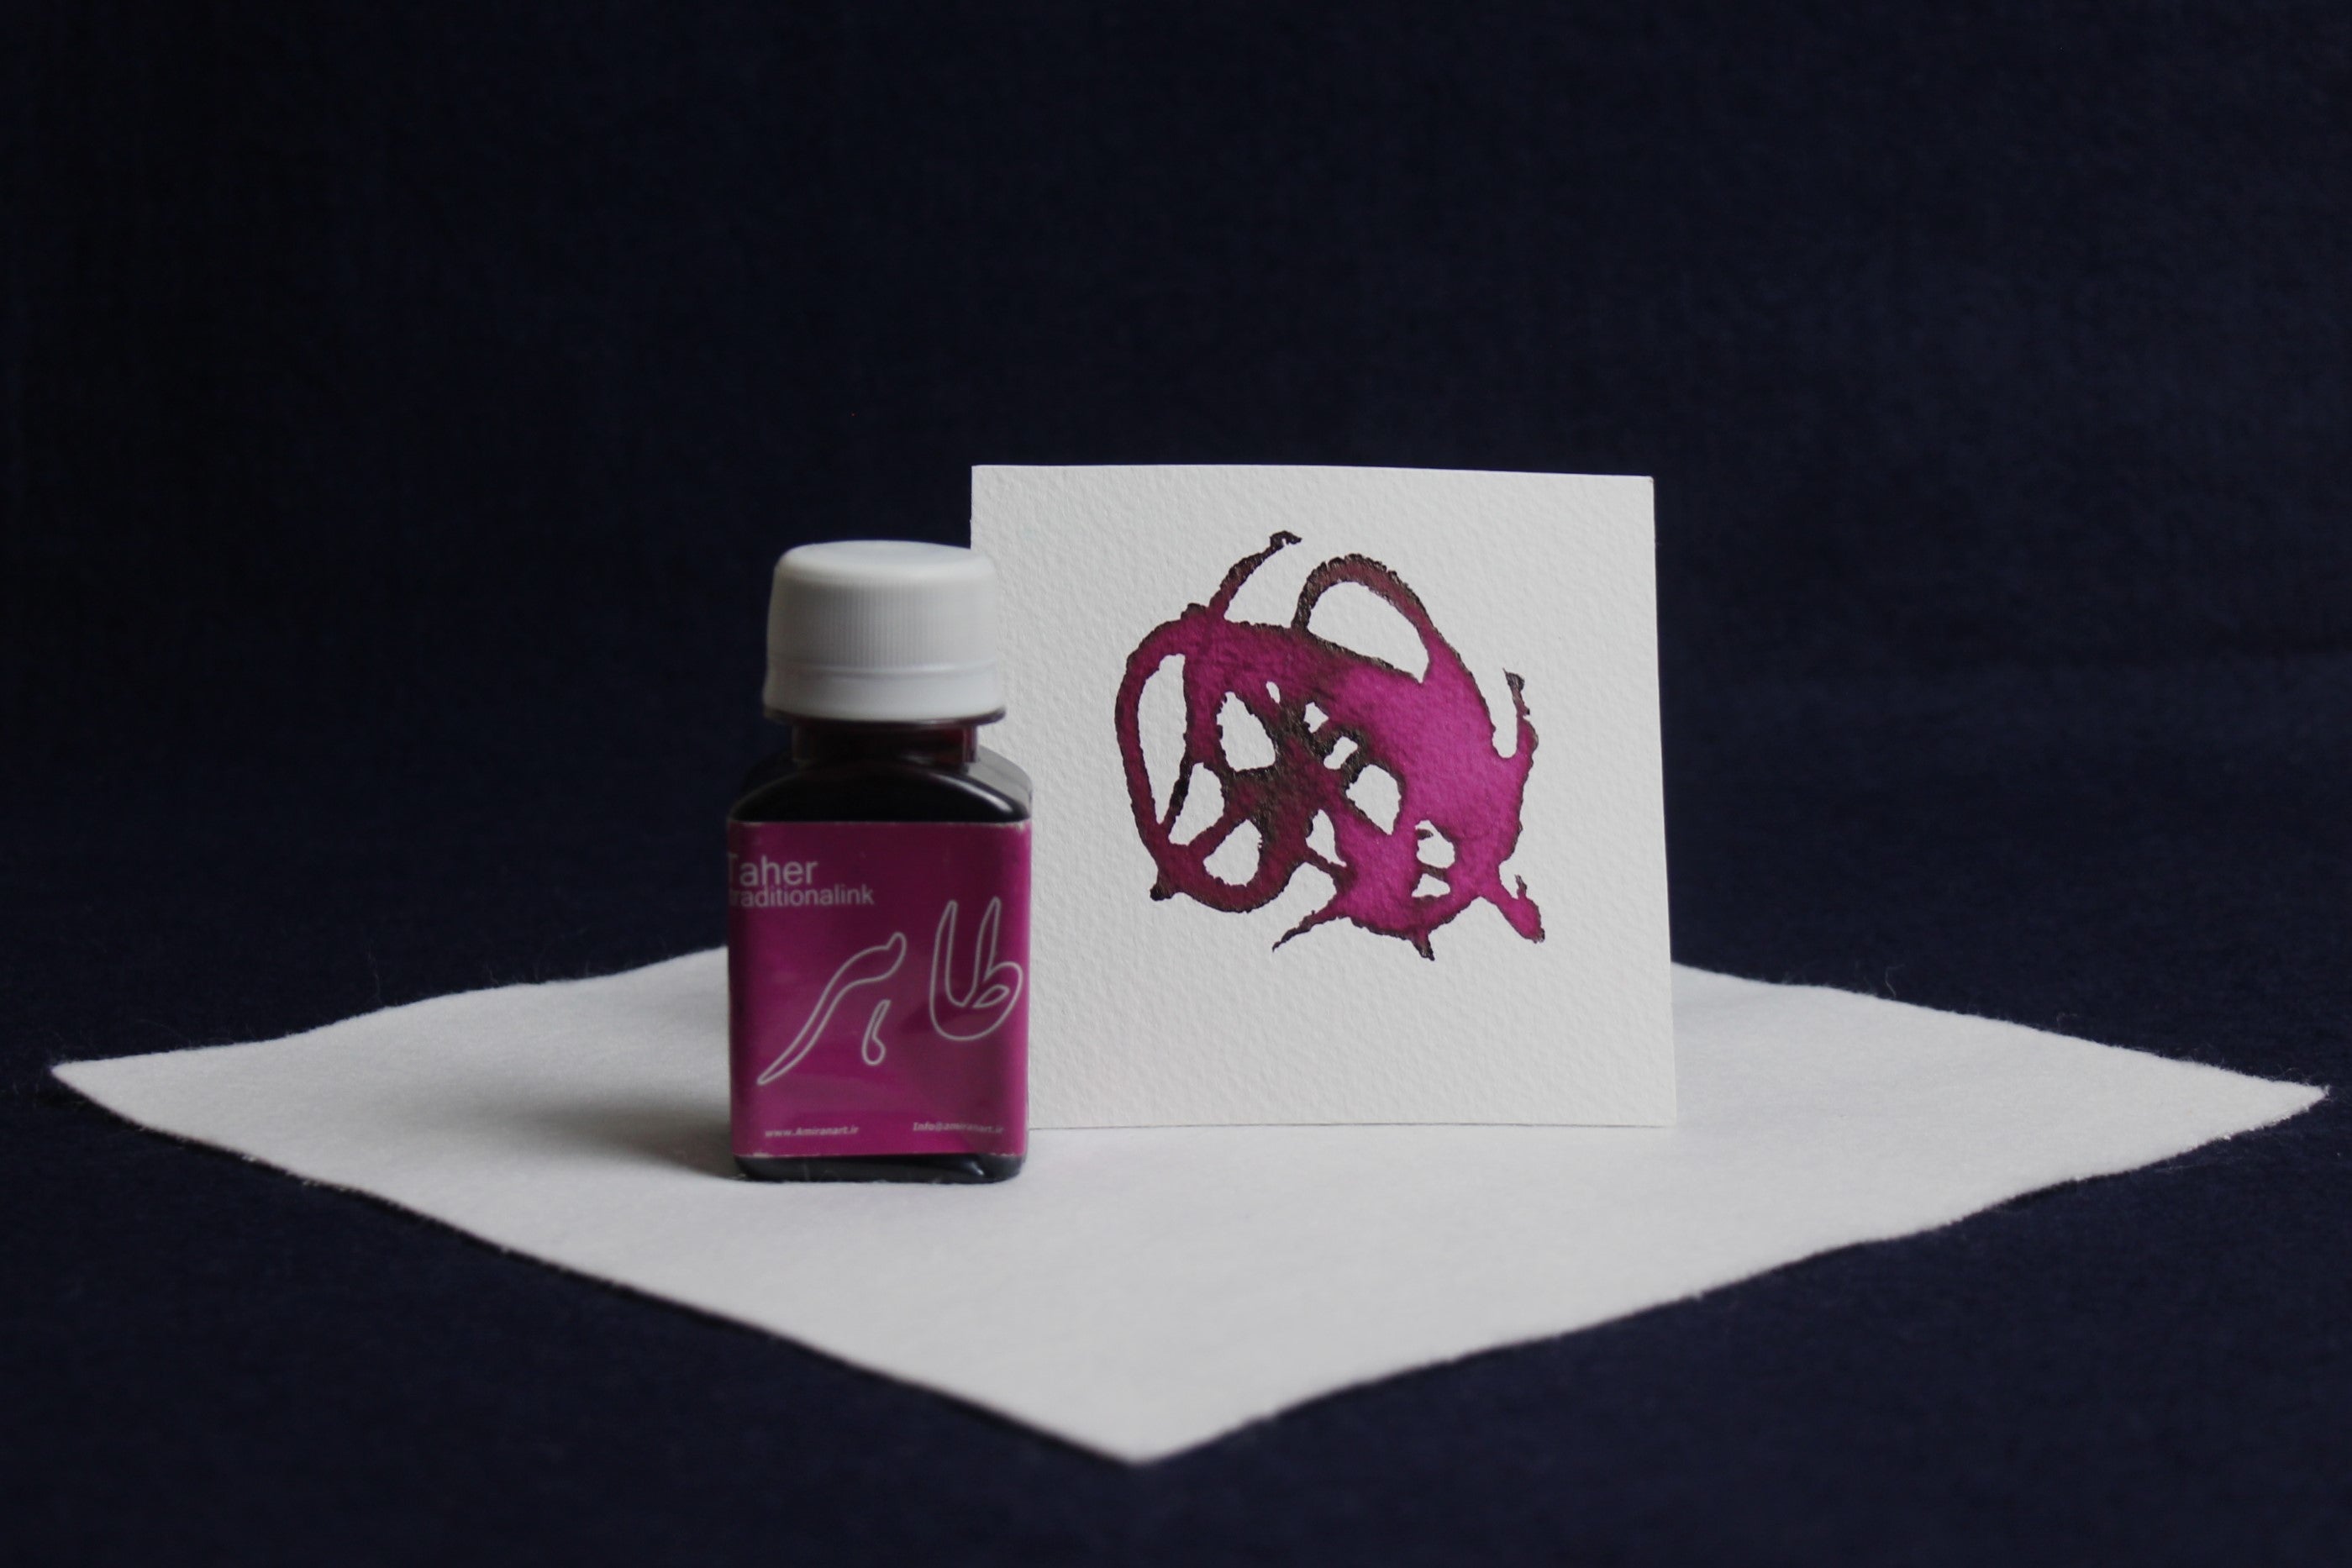 Taher traditional ink for Arabic calligraphy - magenta